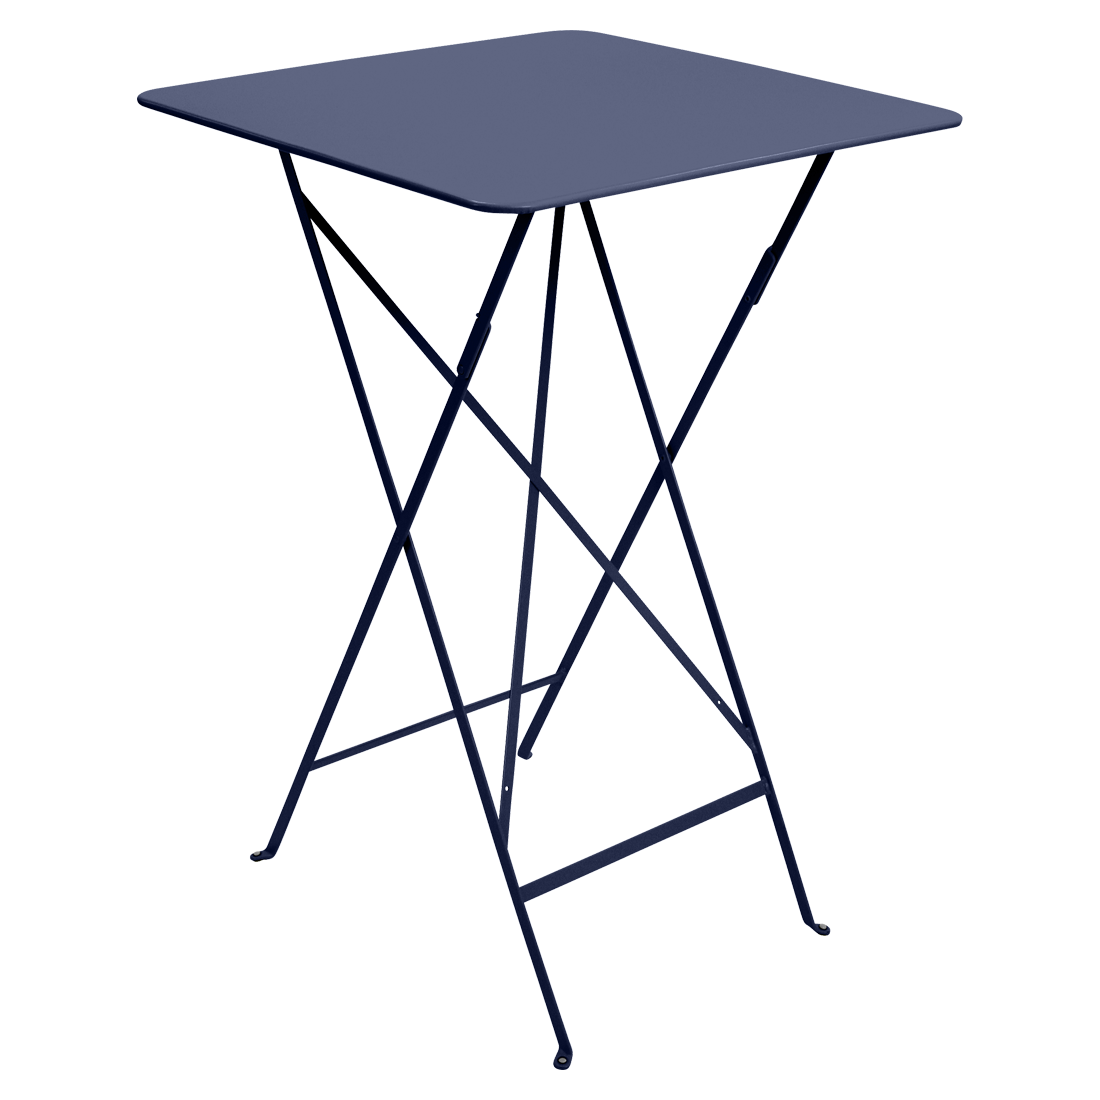 Bistro High Table